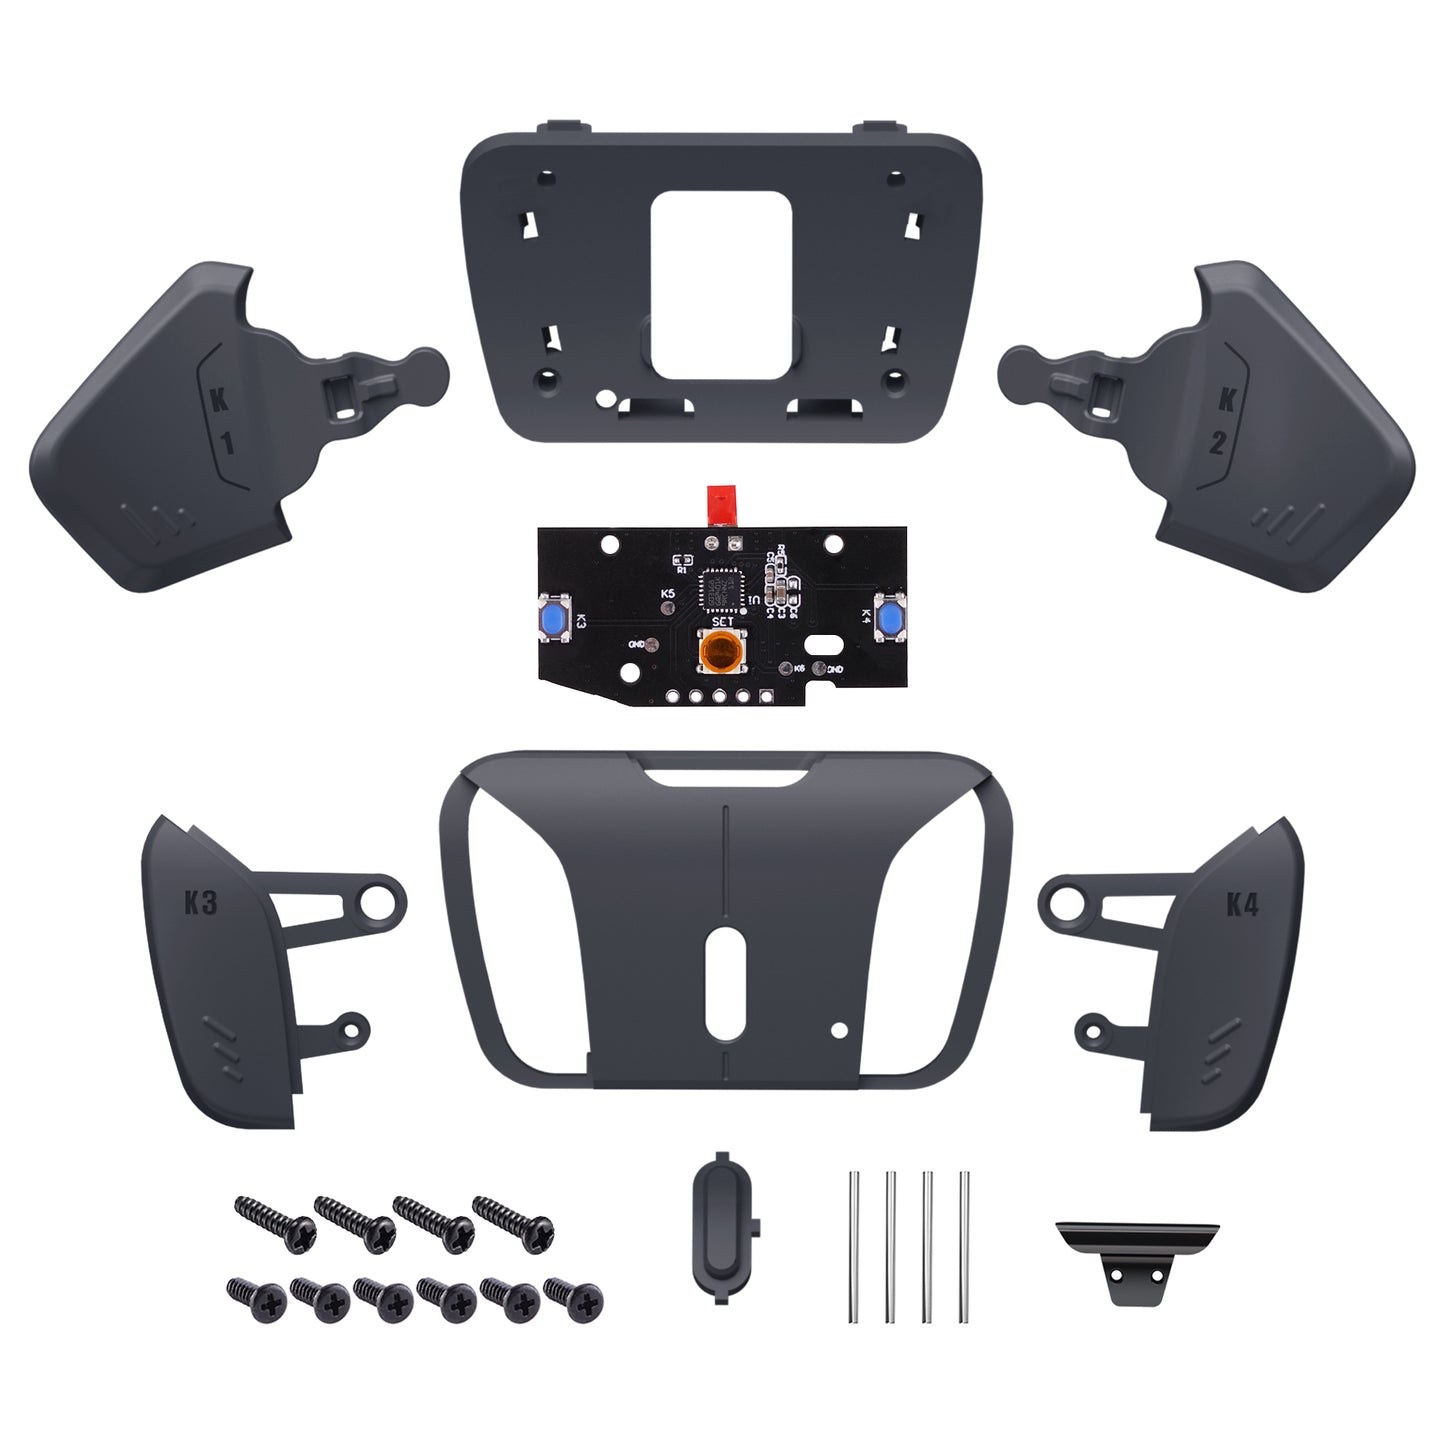 eXtremeRate Retail Turn RISE to RISE4 Kit – Redesigned Classic Gray K1 K2 K3 K4 Back Buttons Housing & Remap PCB Board for PS5 Controller eXtremeRate RISE & RISE4 Remap kit - Controller & Other RISE Accessories NOT Included - VPFM5009P